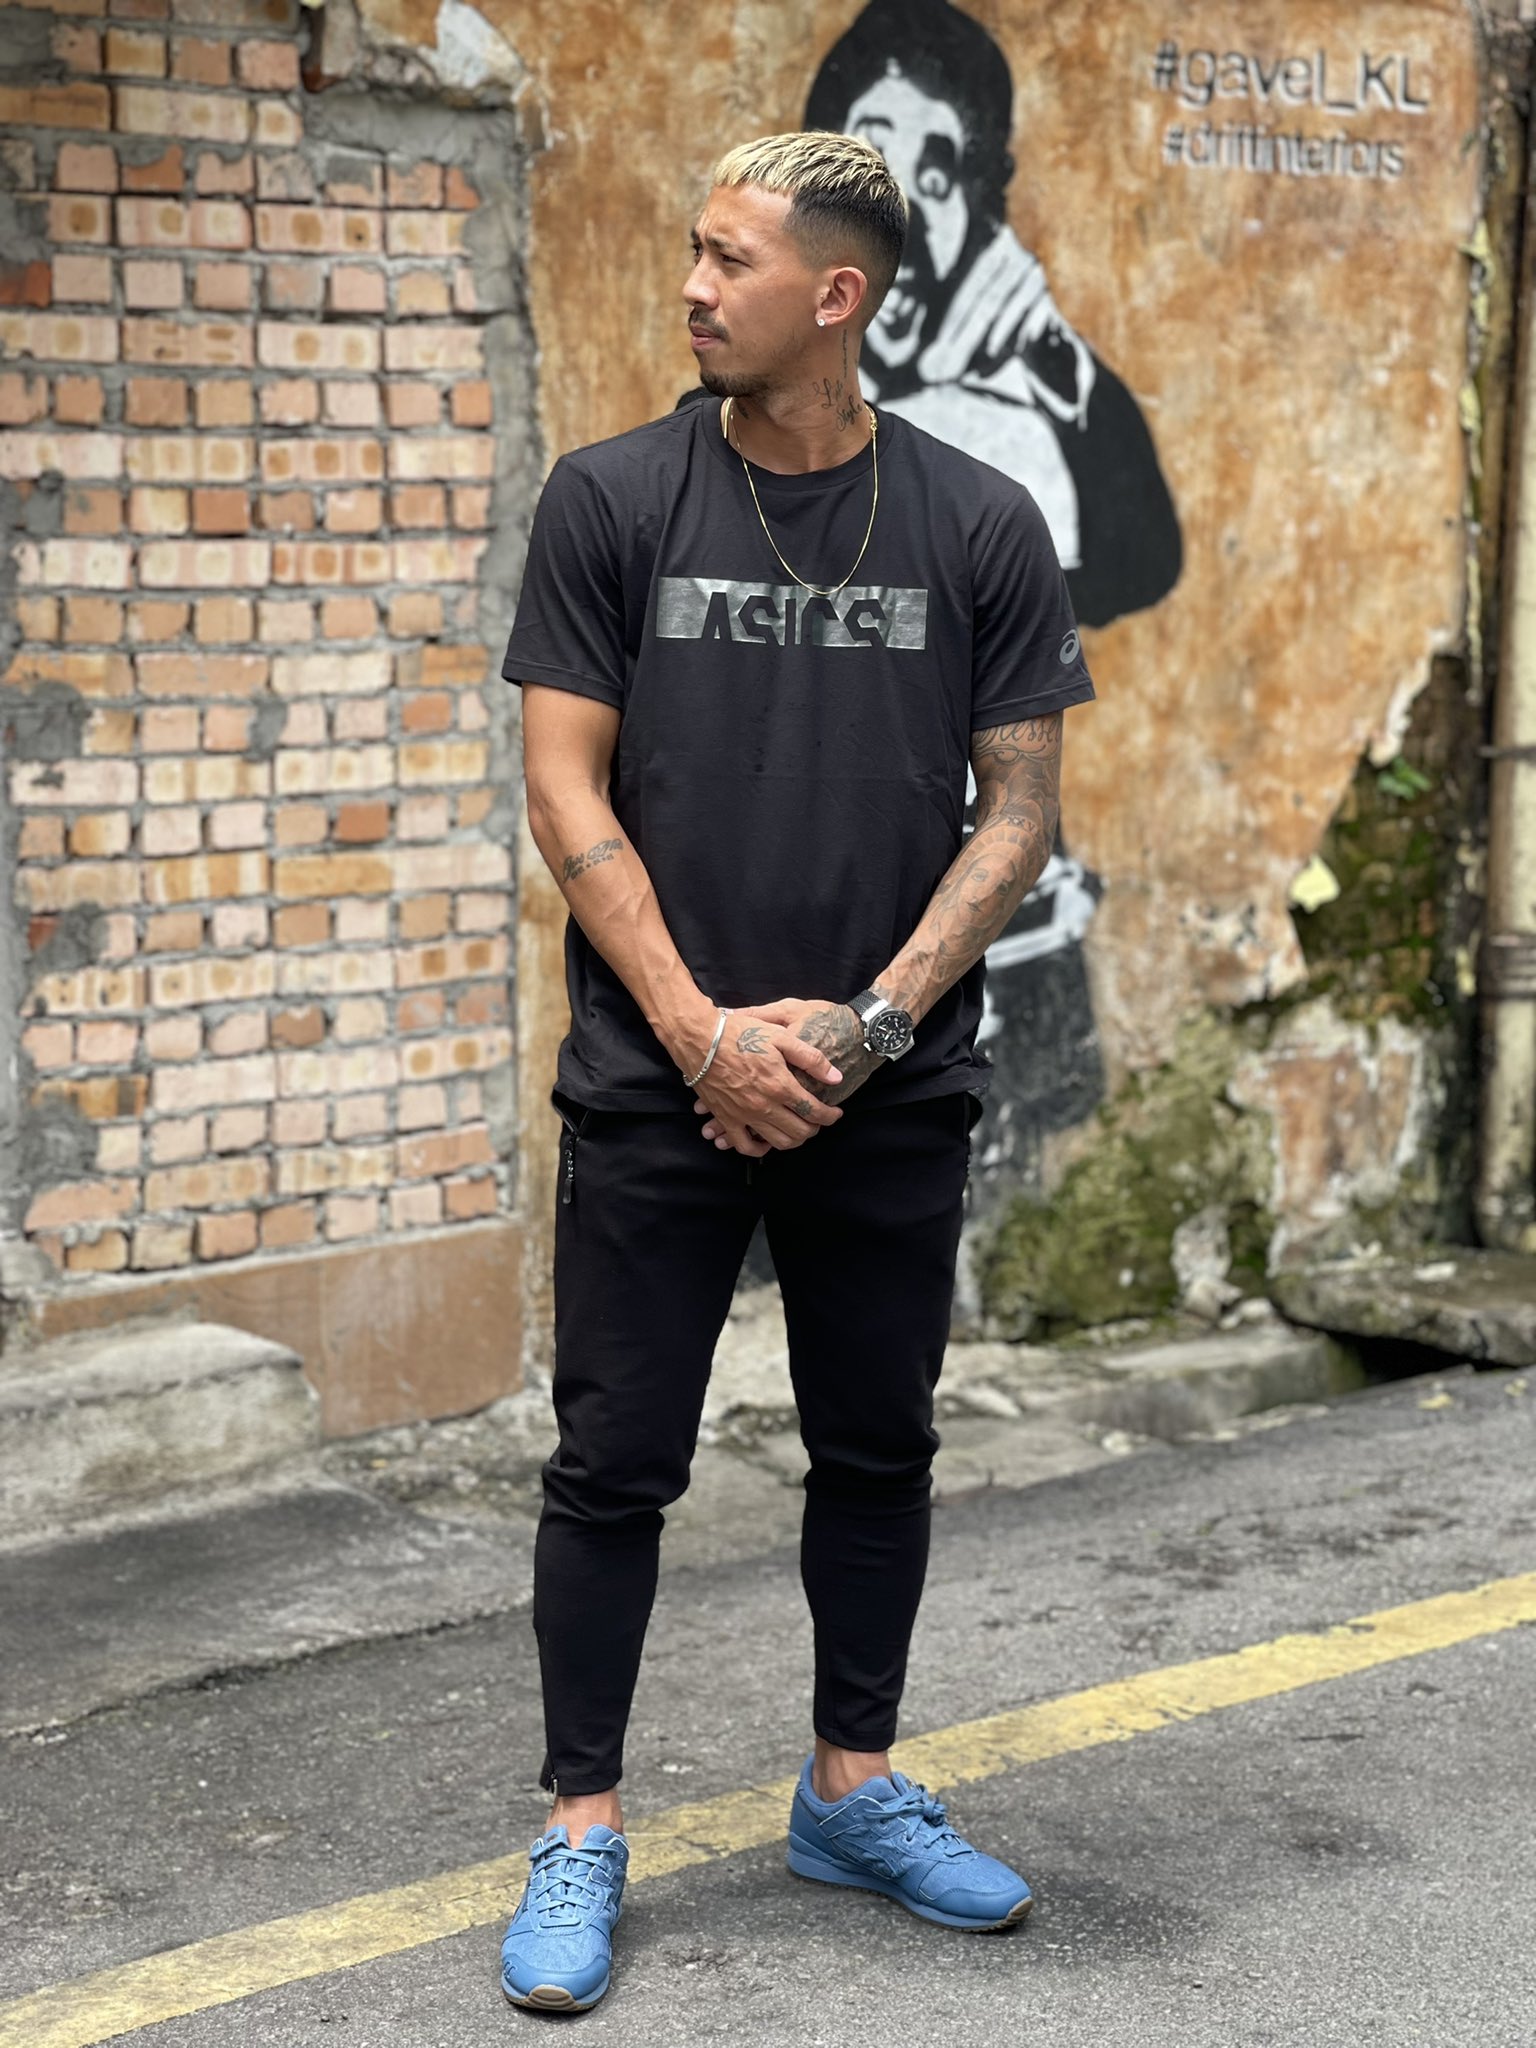 Bruno Suzuki on Twitter: "The #gellyte3 OG sneaker Now available on  https://t.co/X71Qq7QSy9 #asicssportstylemy #patchworkpack #sustainable  #asicsmalaysia #soundmindsoundbody https://t.co/SvOpvj4d1F" / Twitter